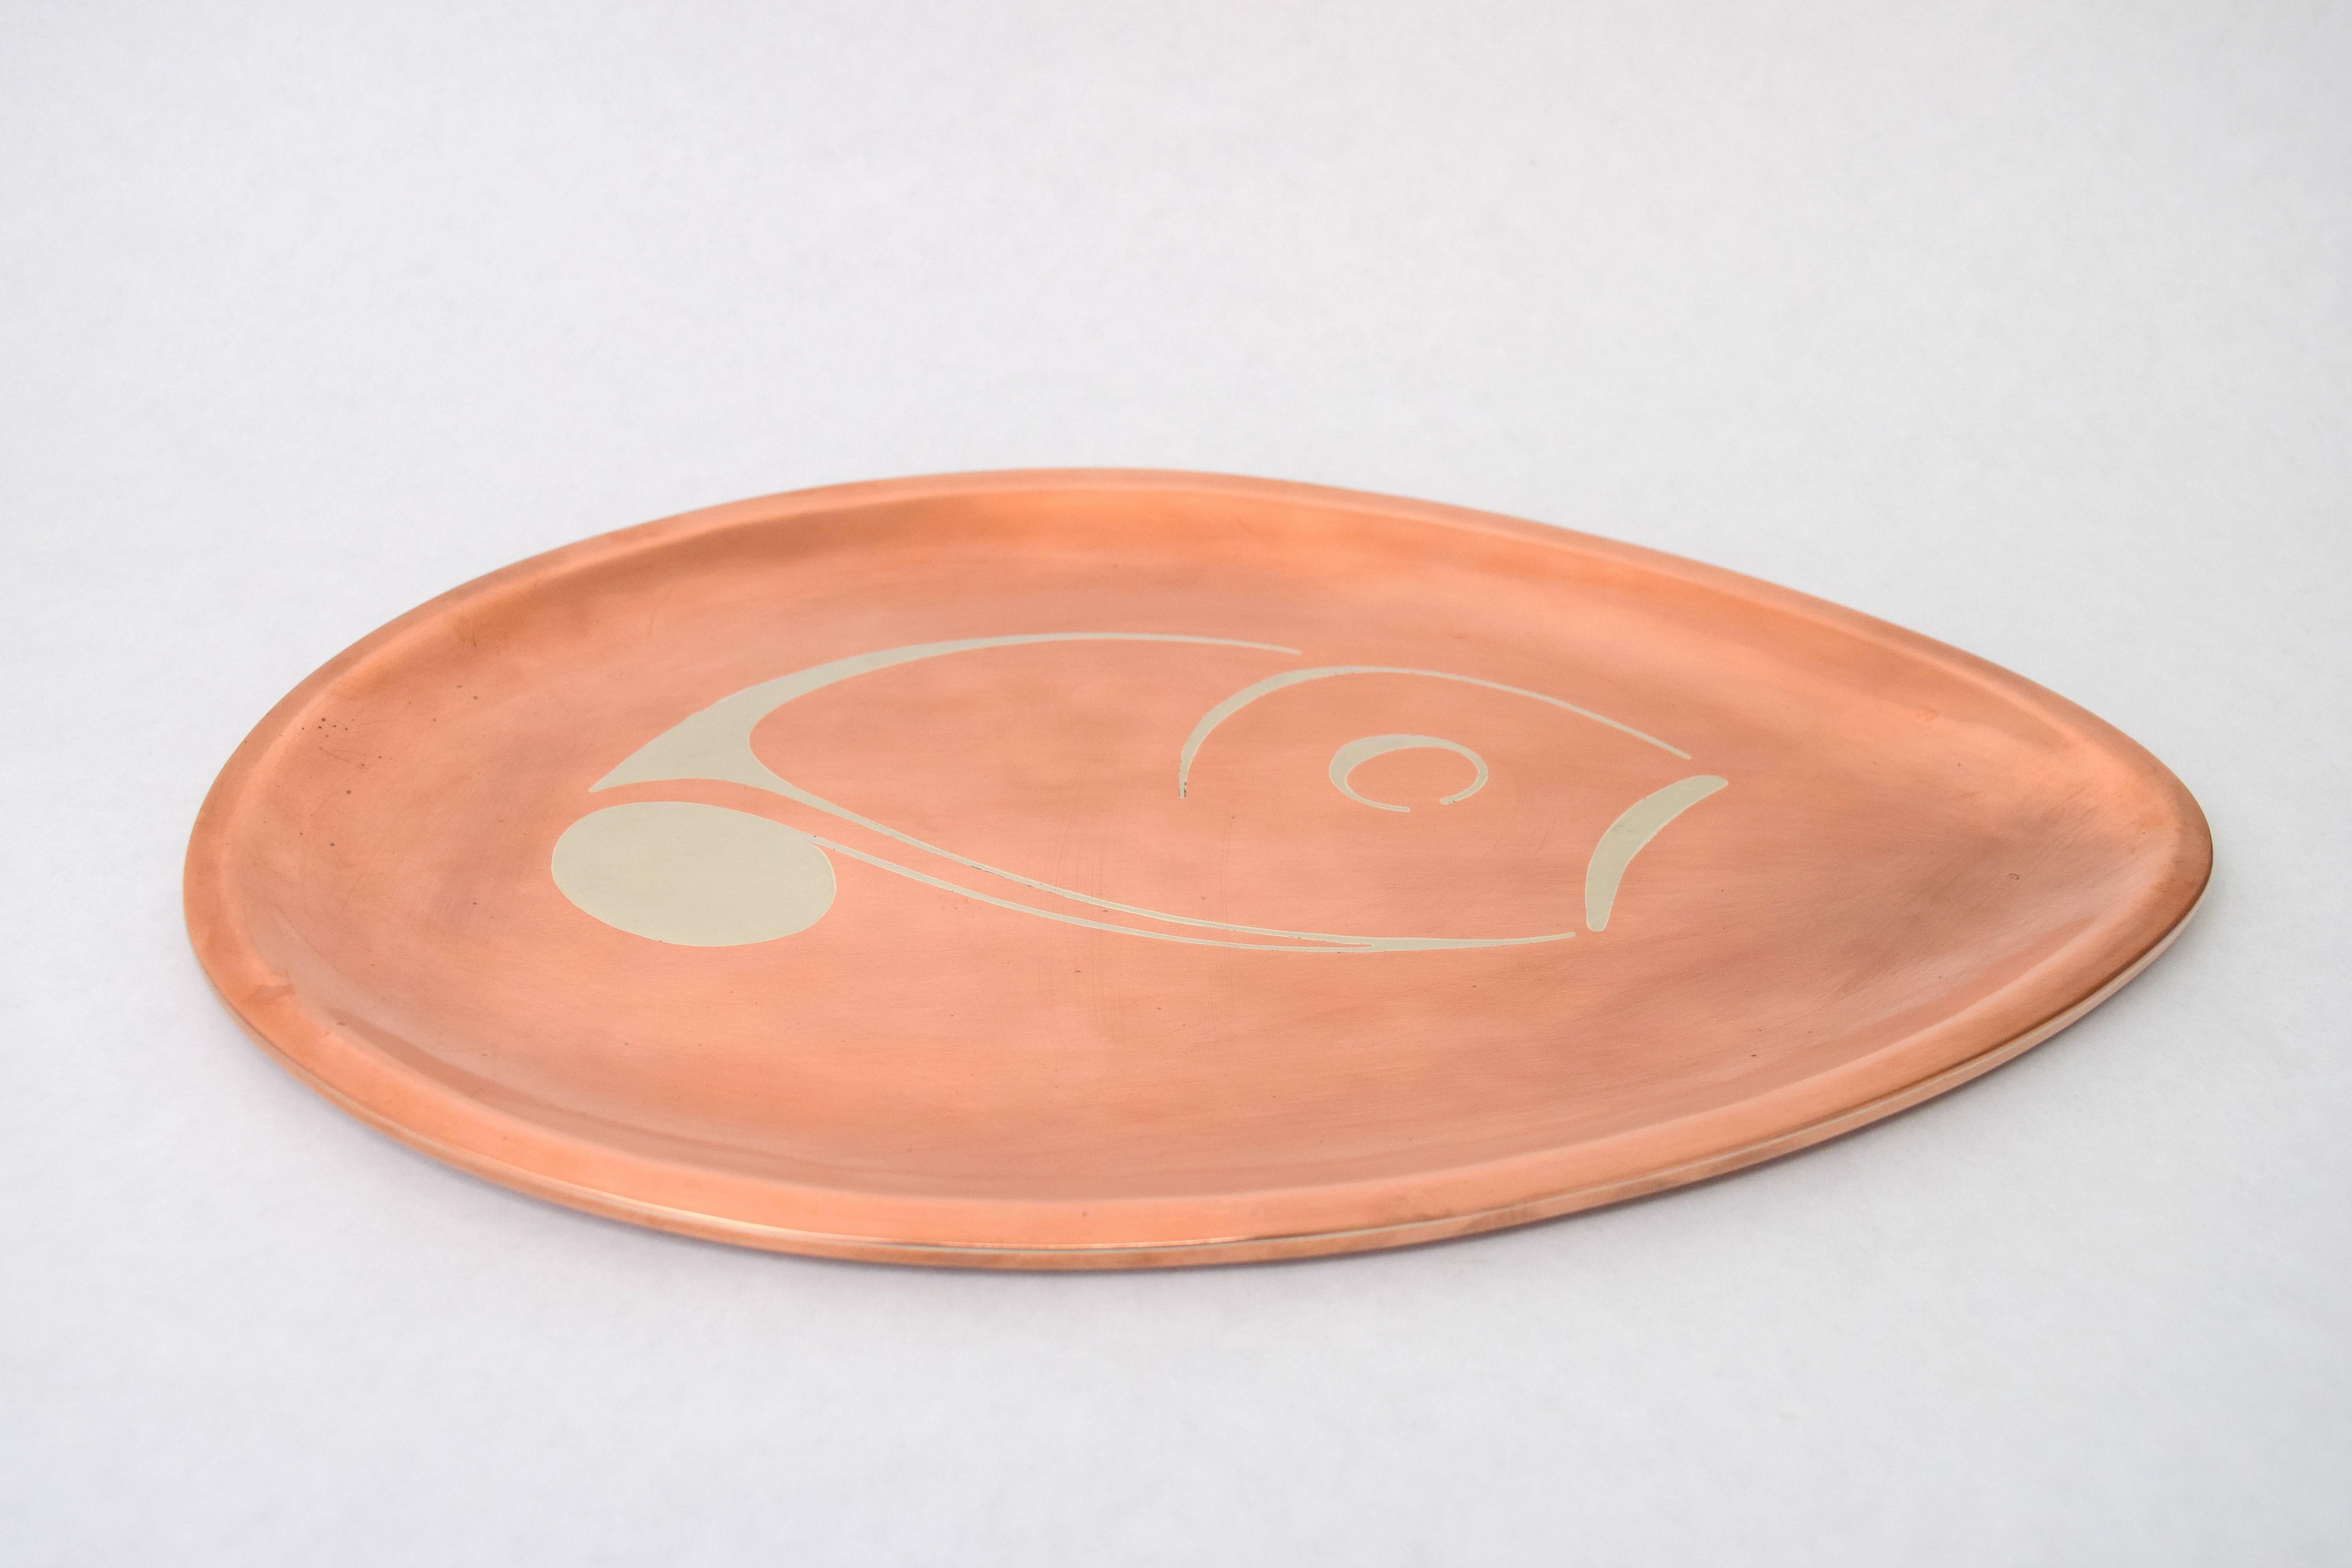 Lovely copper and sterling silver teardrop tray with abstract design. Copper almost a rose gold coloration contrasting with silver center design. Hallmarked with Los Castillo mixed metal stamp from 1950s.